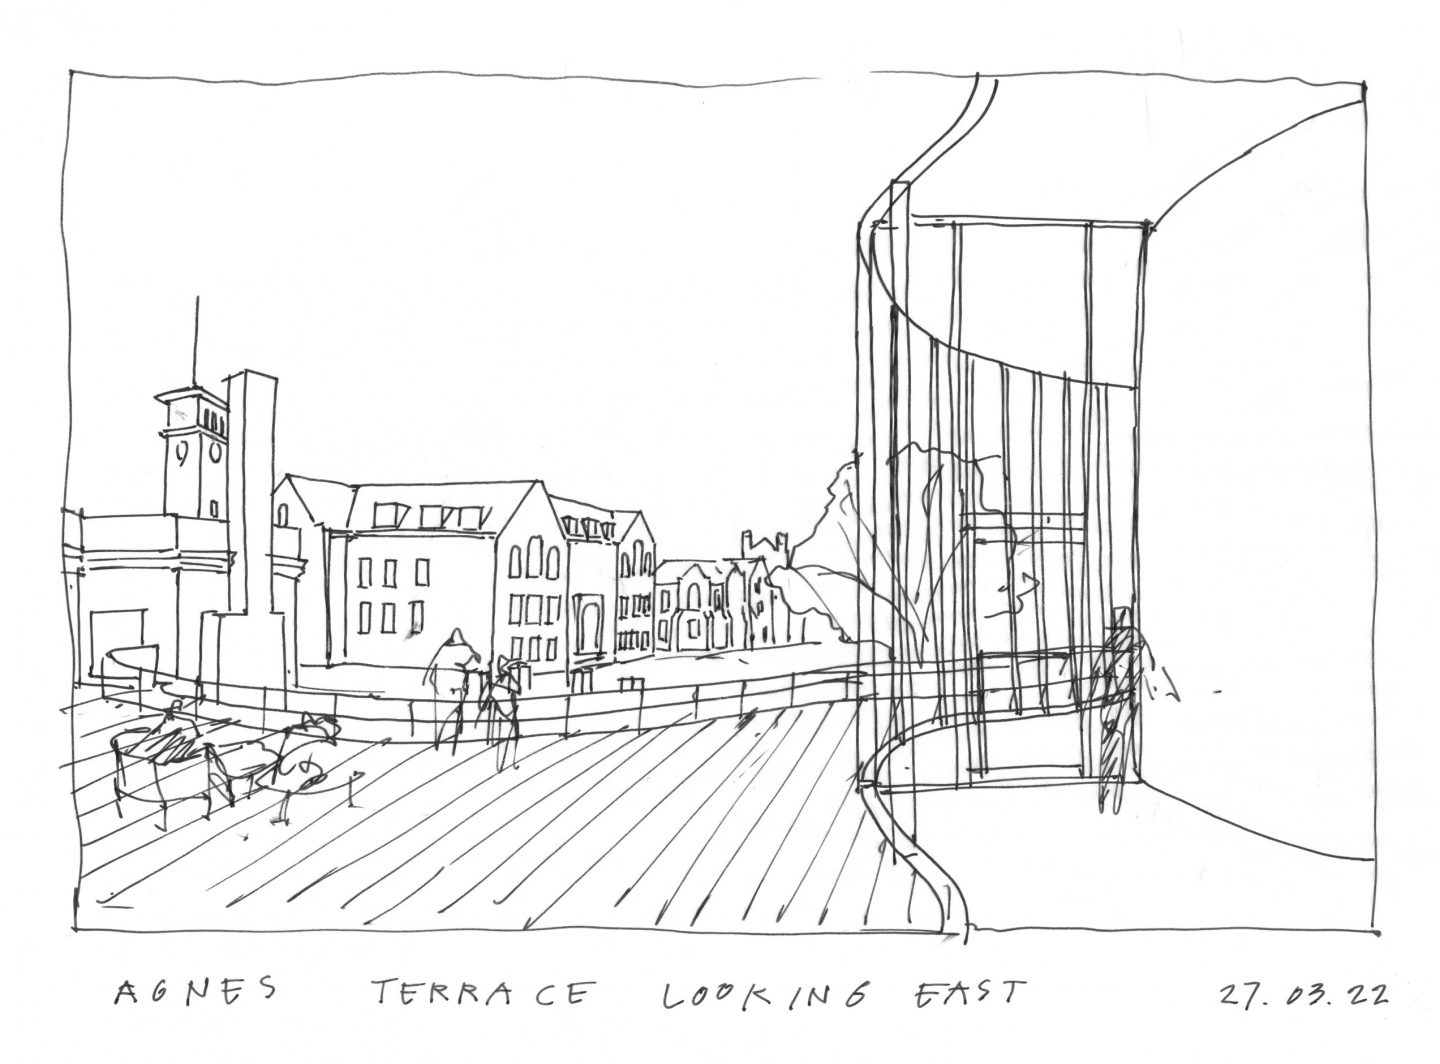 Bruce Kuwabara, Sketch for Agnes Reimagined, Agnes Terrace Looking East, 27 March 2022. Courtesy of KPMB Architects